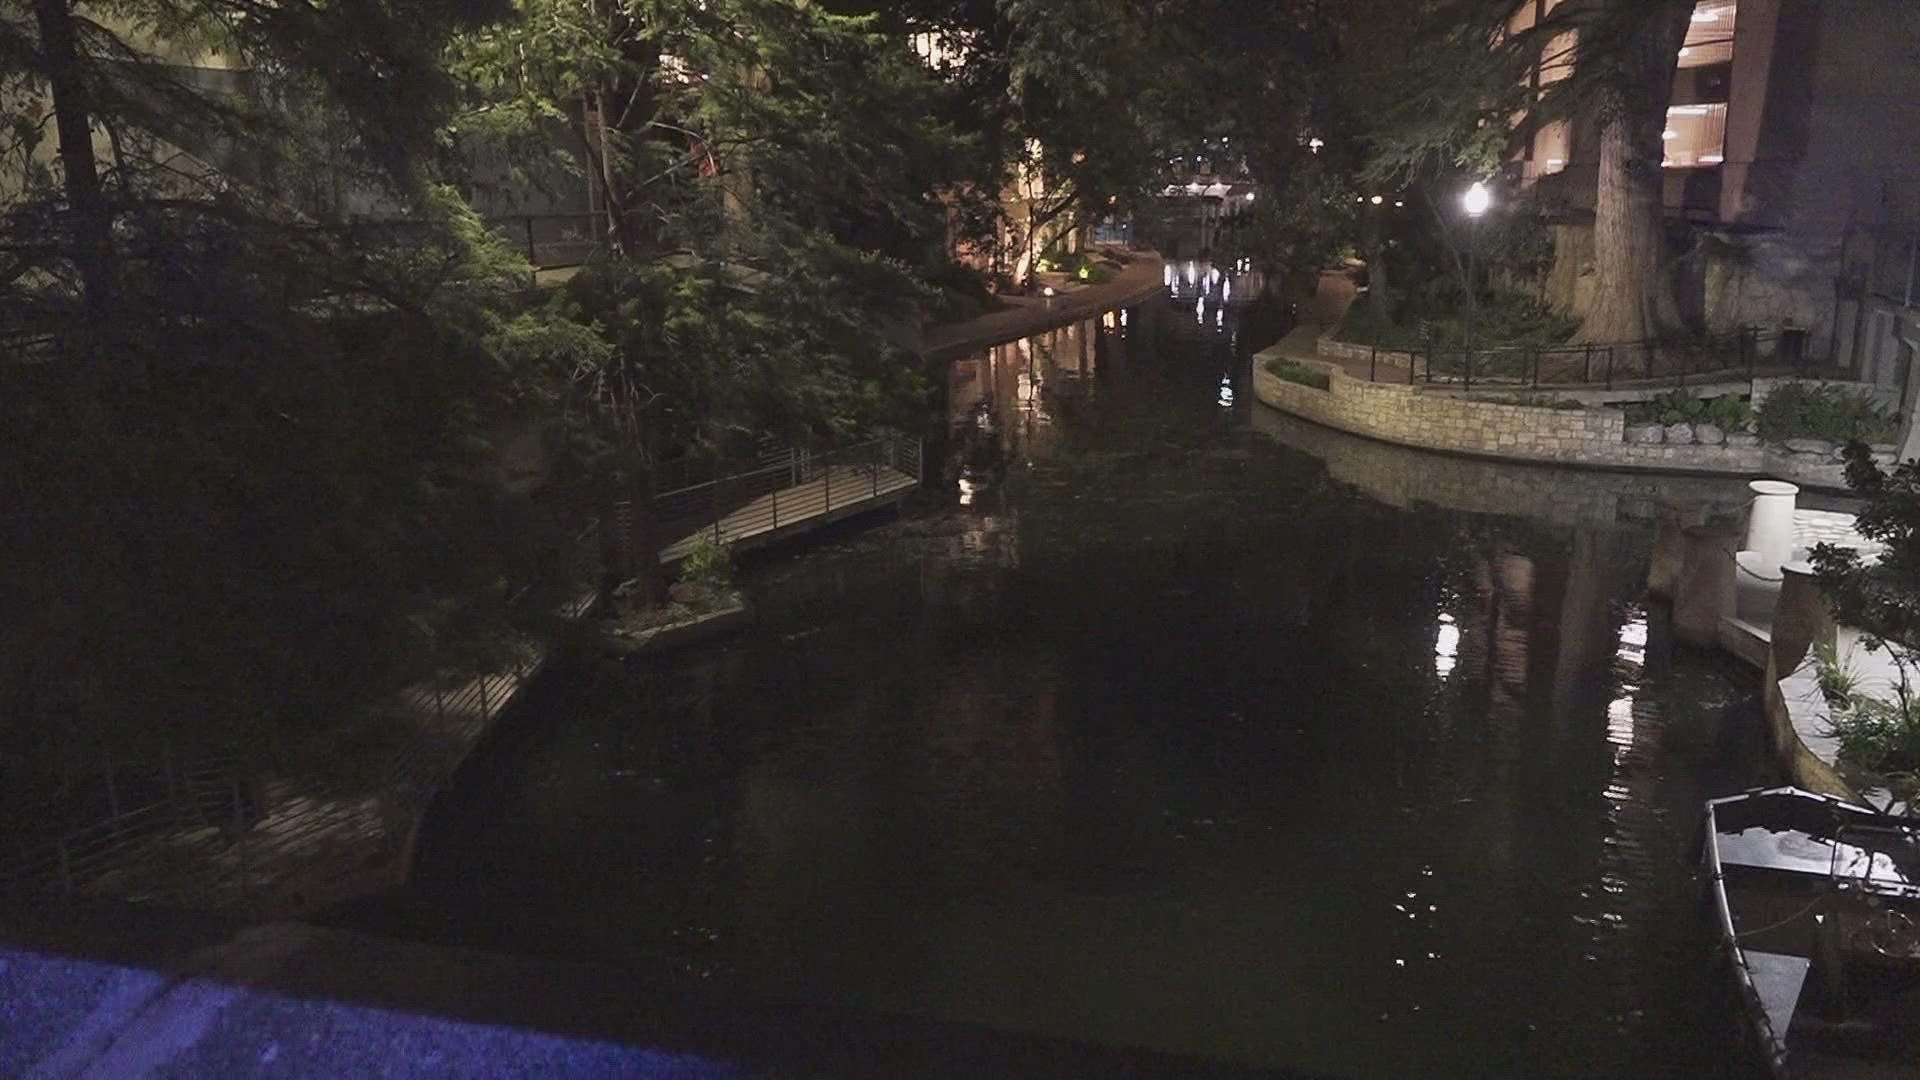 A man was walking the San Antonio River Walk when he discovered the body.